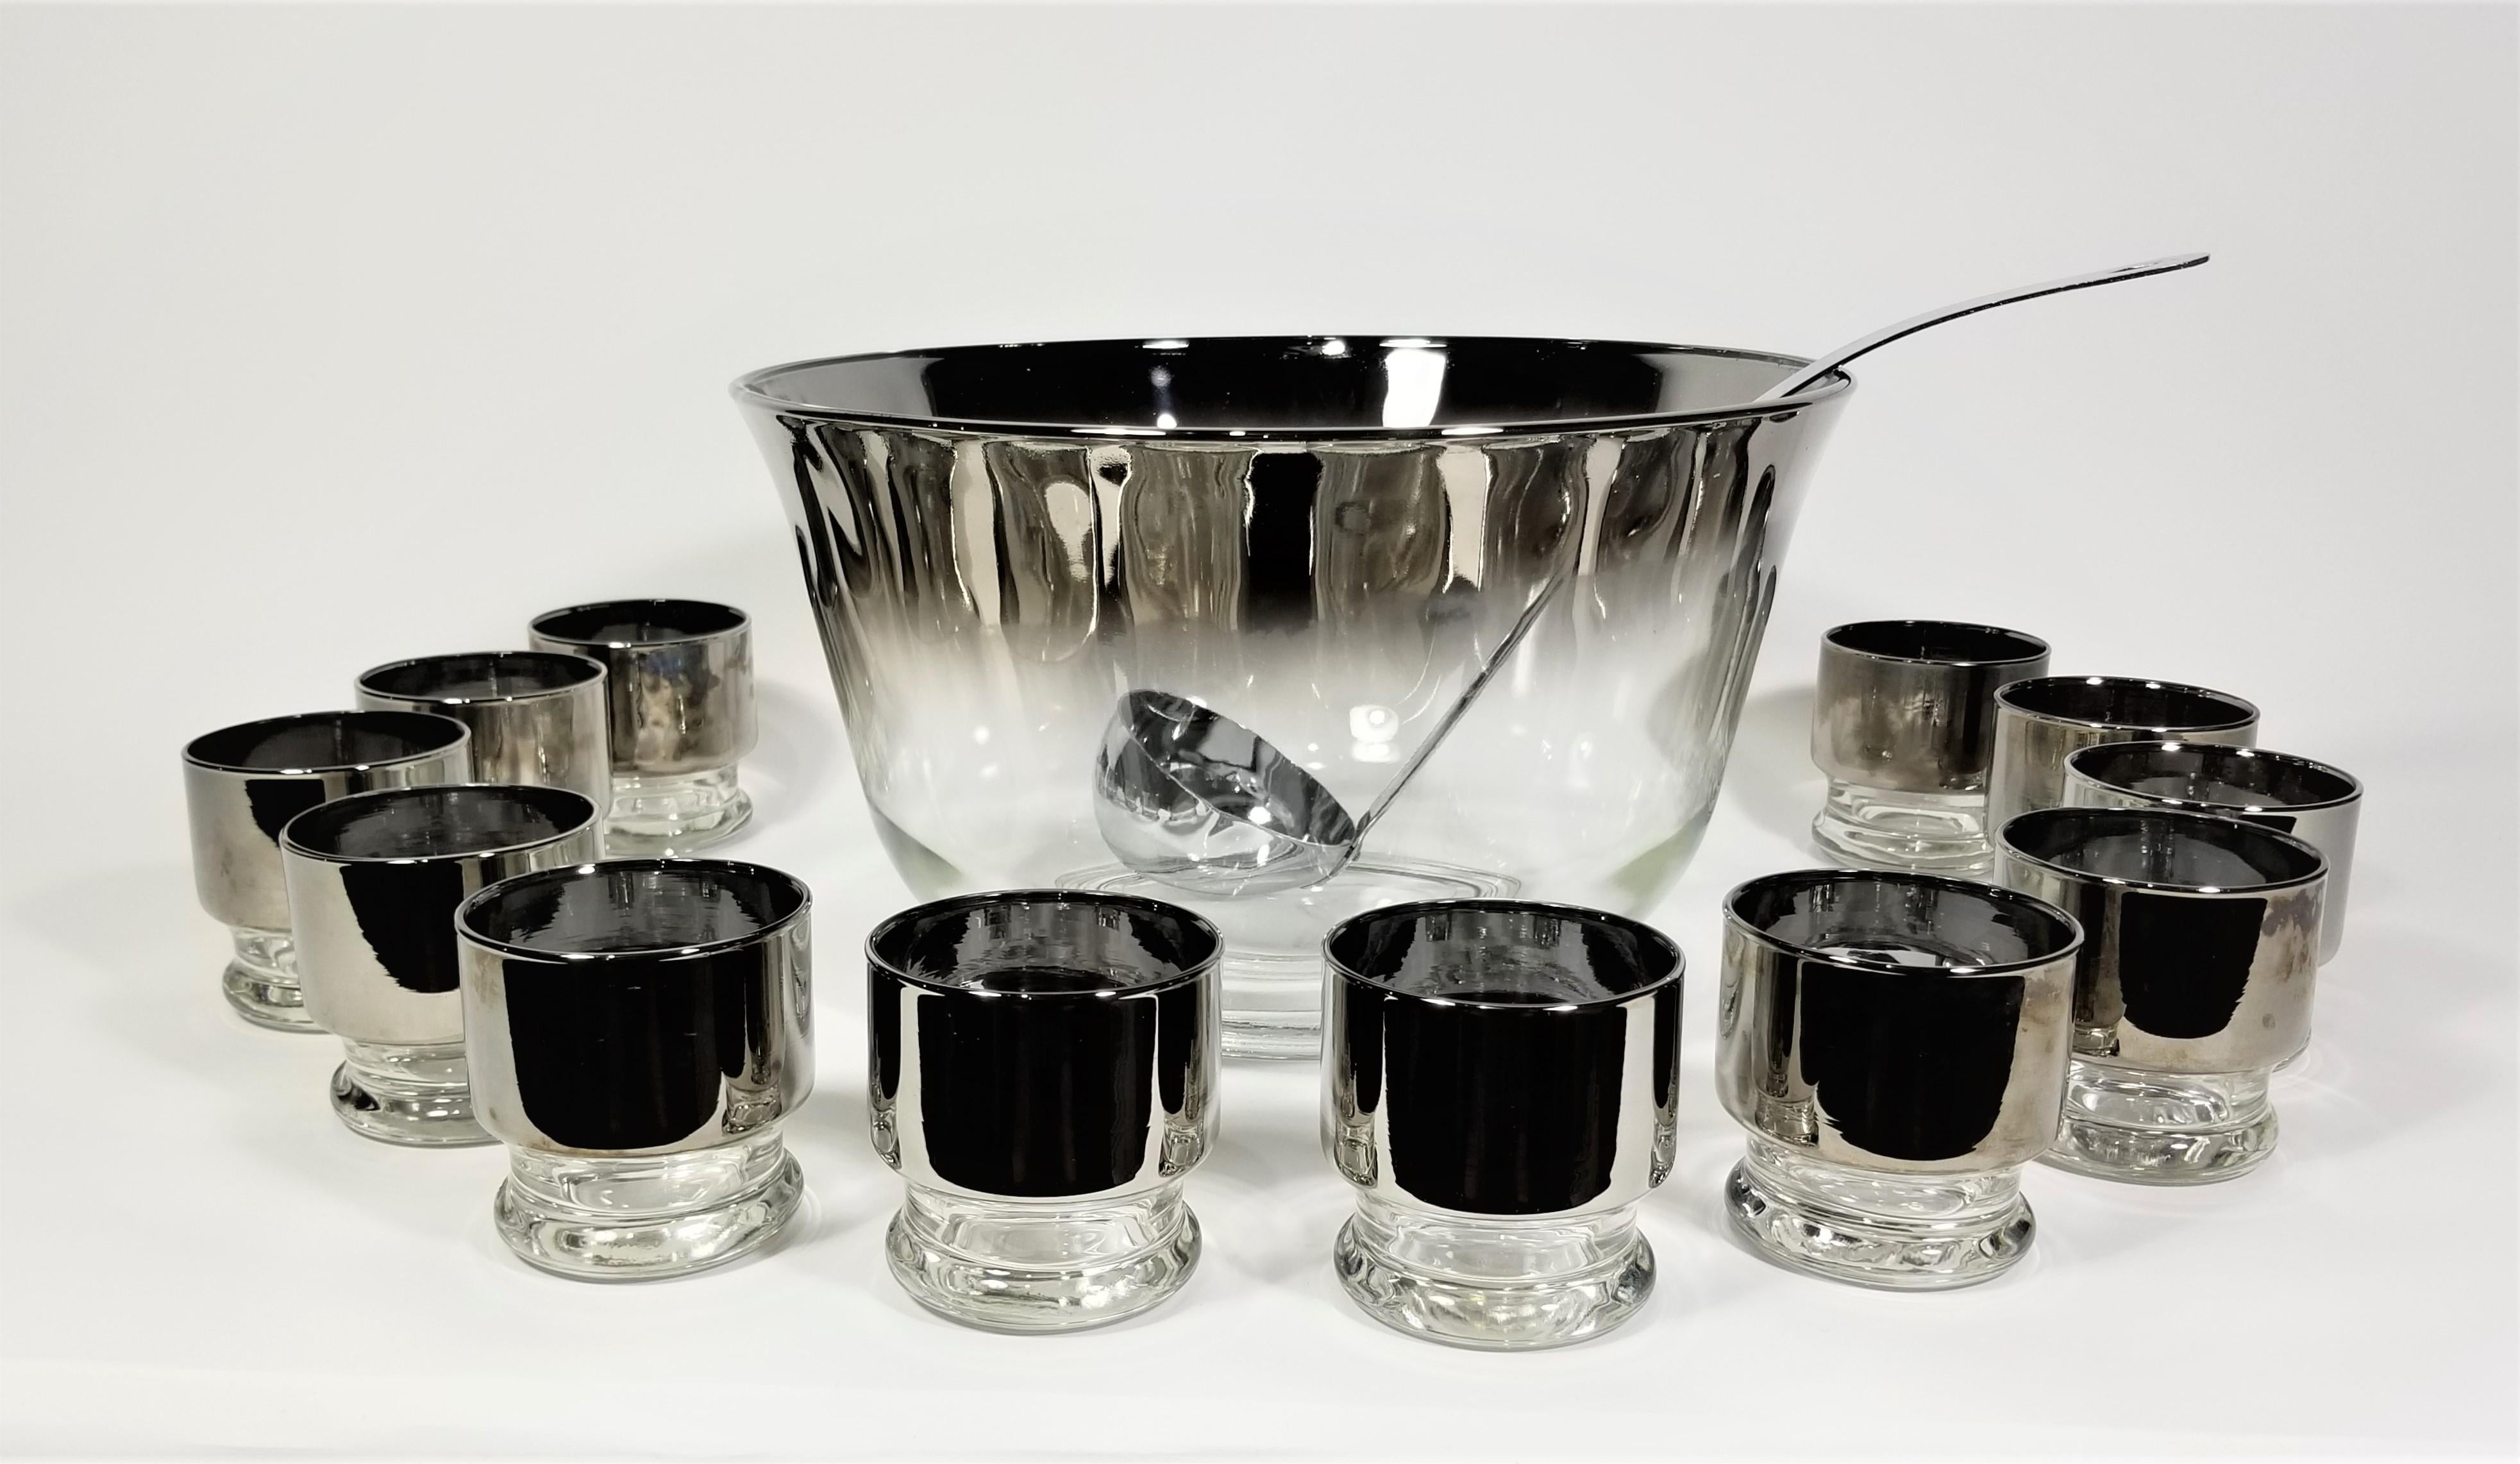 1960s Mid century dorothy thorpe glassware barware. Punch bowl set. 14 pieces. Includes punch bowl. 12 glasses. Ladle and holder / carrier. 

*Please see photos. Set is in Excellent condition with exception of exhibiting some wear or slight